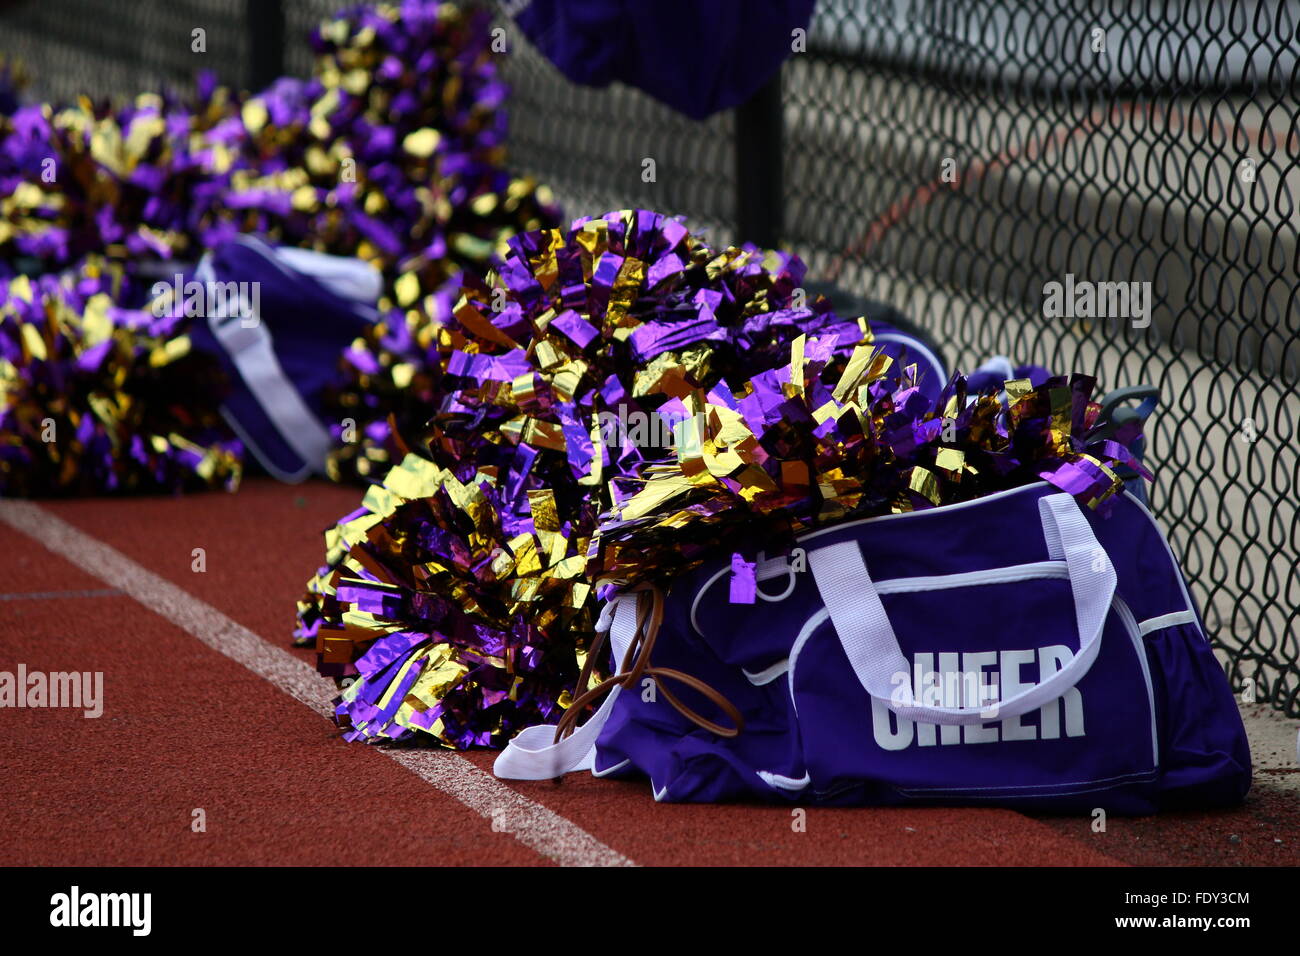 Close-up photograph of cheerleader bags with pom poms on tennis court Stock Photo